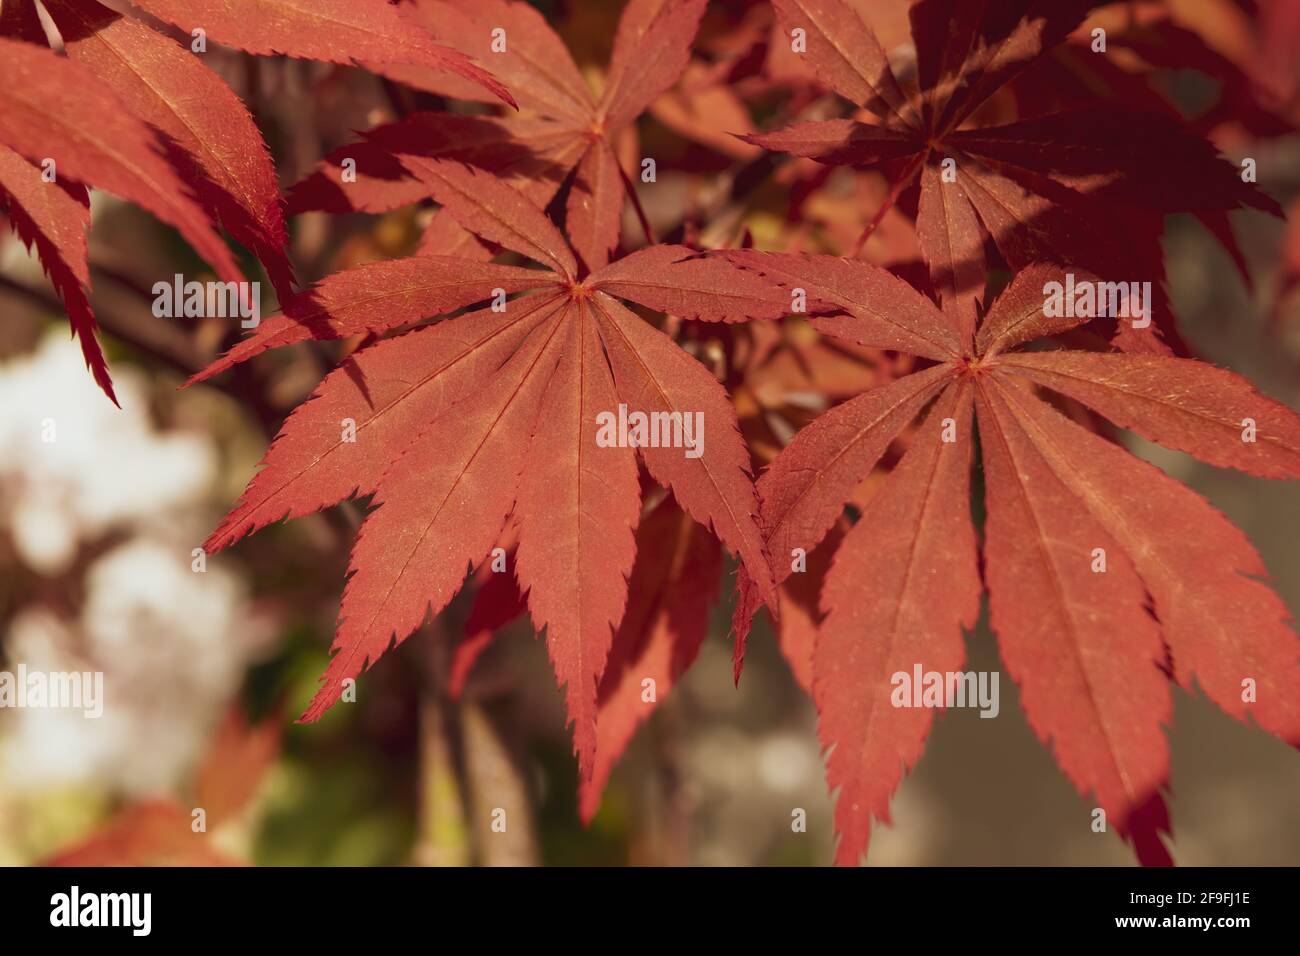 A Close up of acer palmatum bonsai with its distinctive red leaves Stock Photo